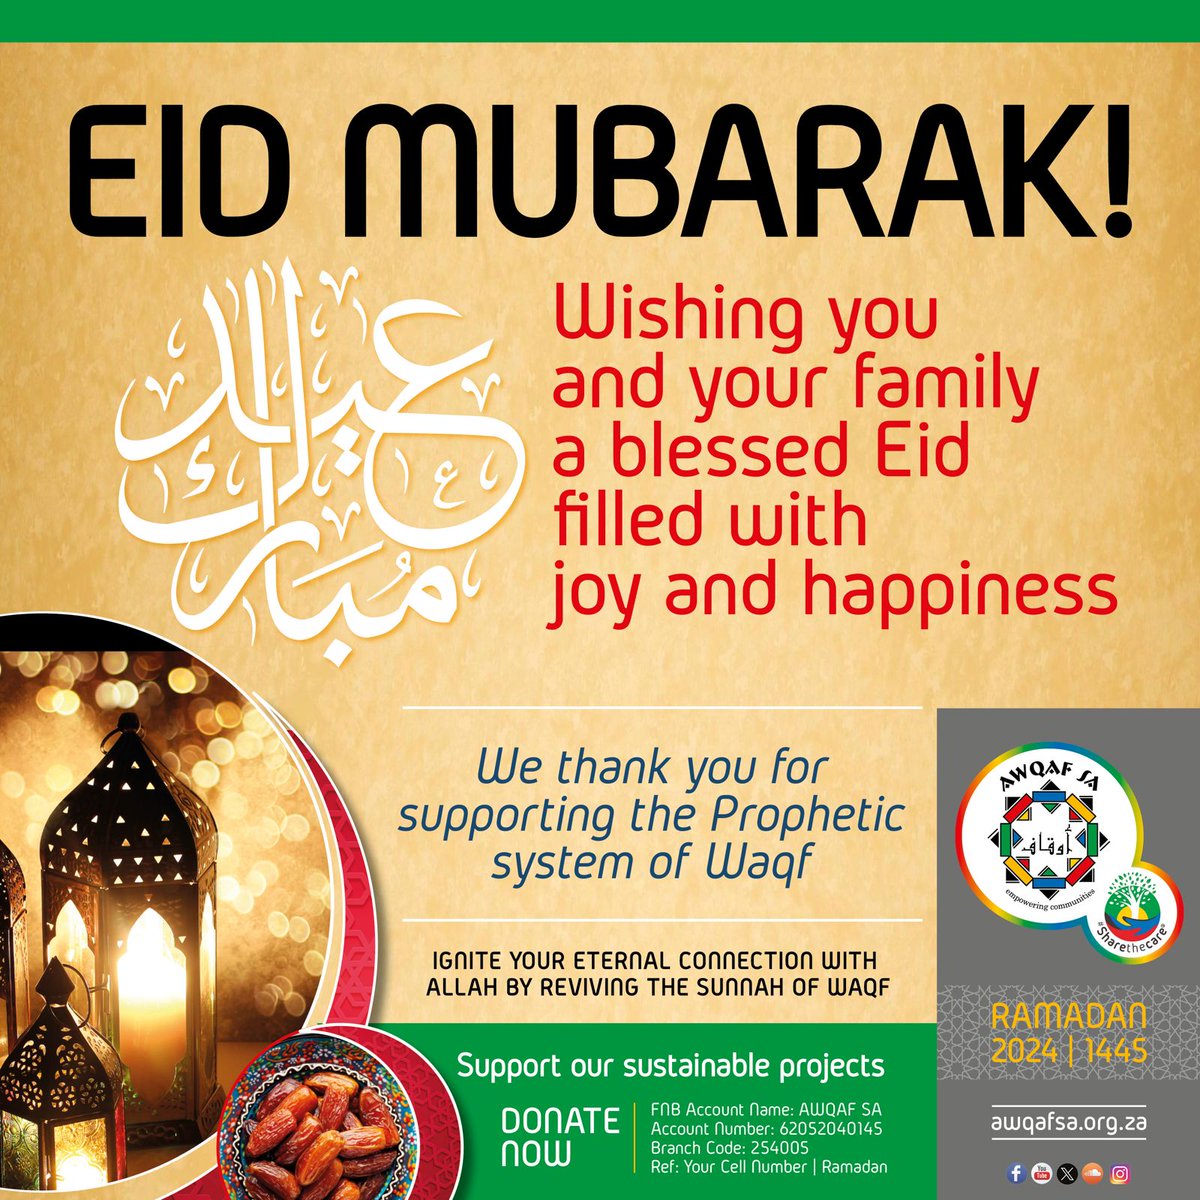 Awqaf SA Eid Mubarak 1445/2024 Awqaf SA, Trustees, Management Team, and Ambassadors wish you and your families blessed Eid and a day full of joy. We wish you and your loved ones an Eid filled with happiness and blessings.